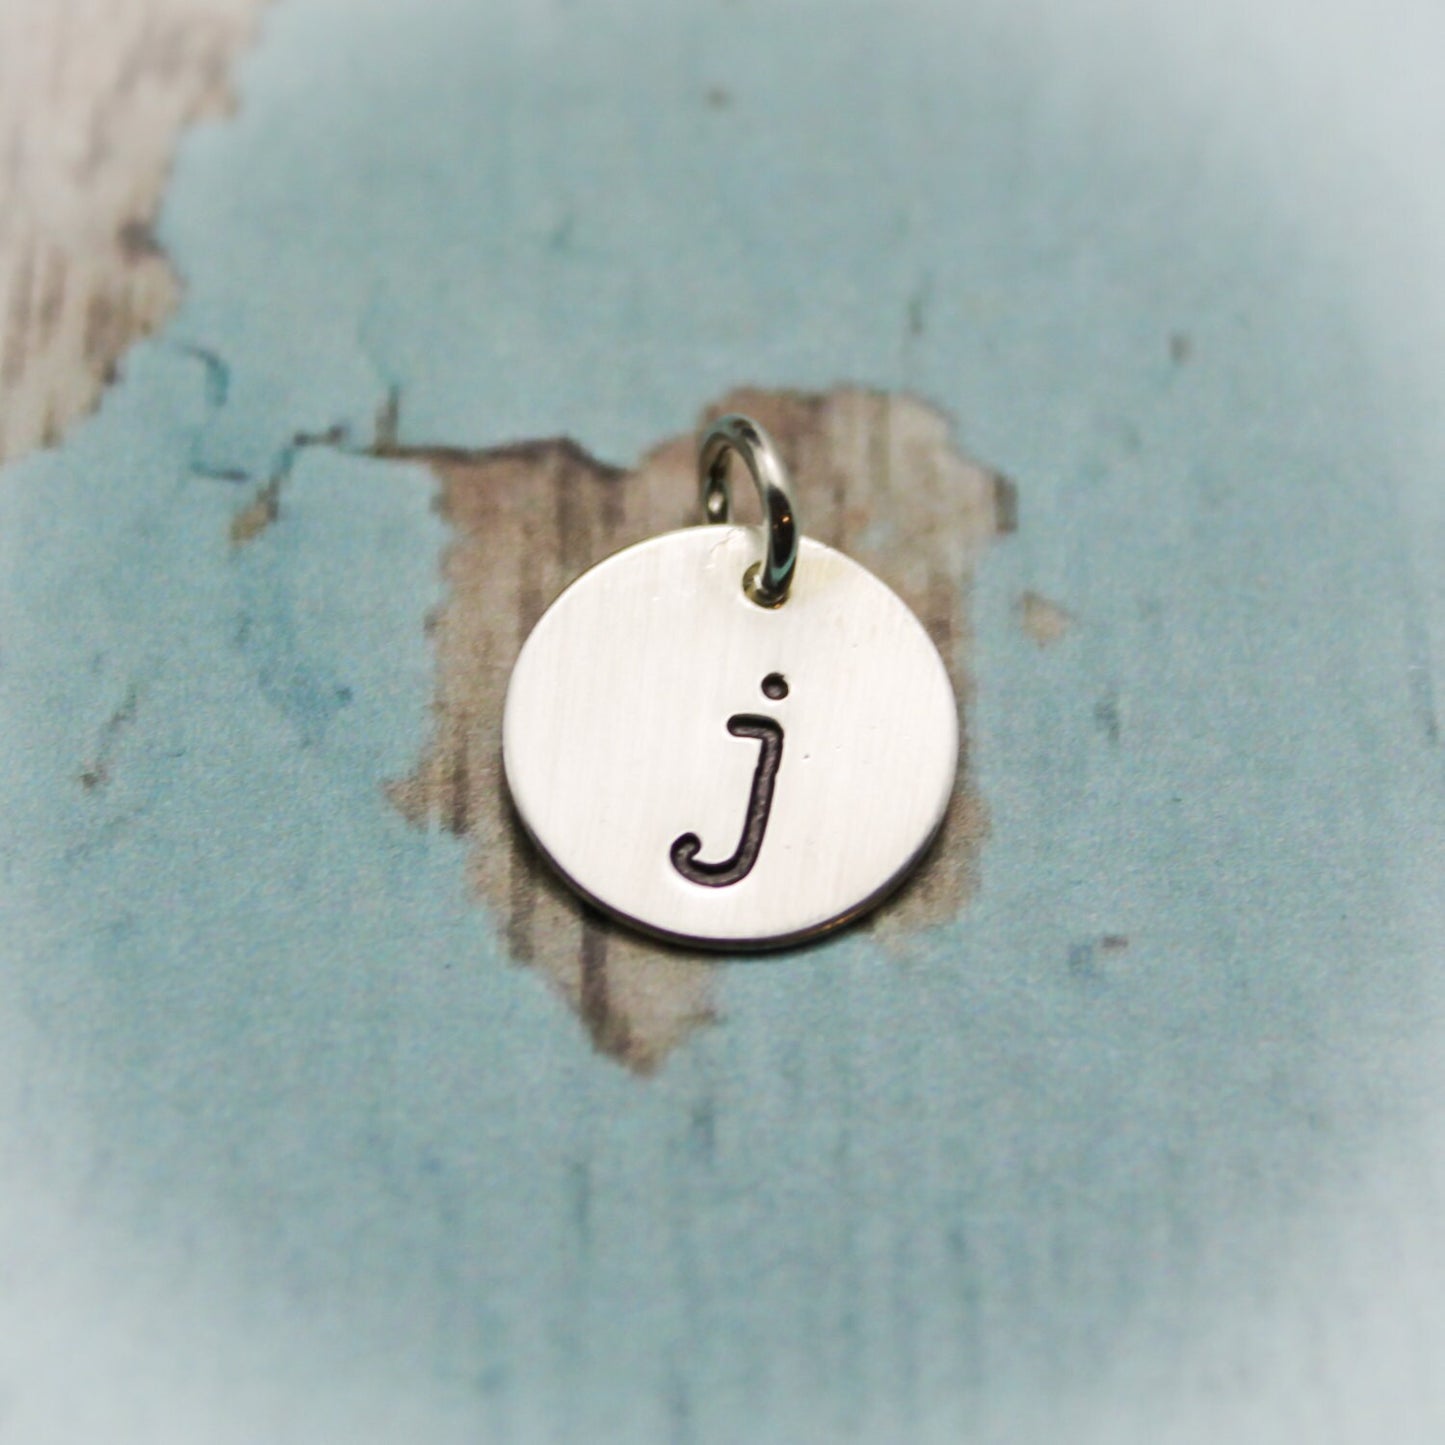 Personalized Initial Charm, Sterling Silver Disc Letter Charm, Letter Disc Charm, Alphabet Charm, Hand Stamped Initial Charm, Silver Letter